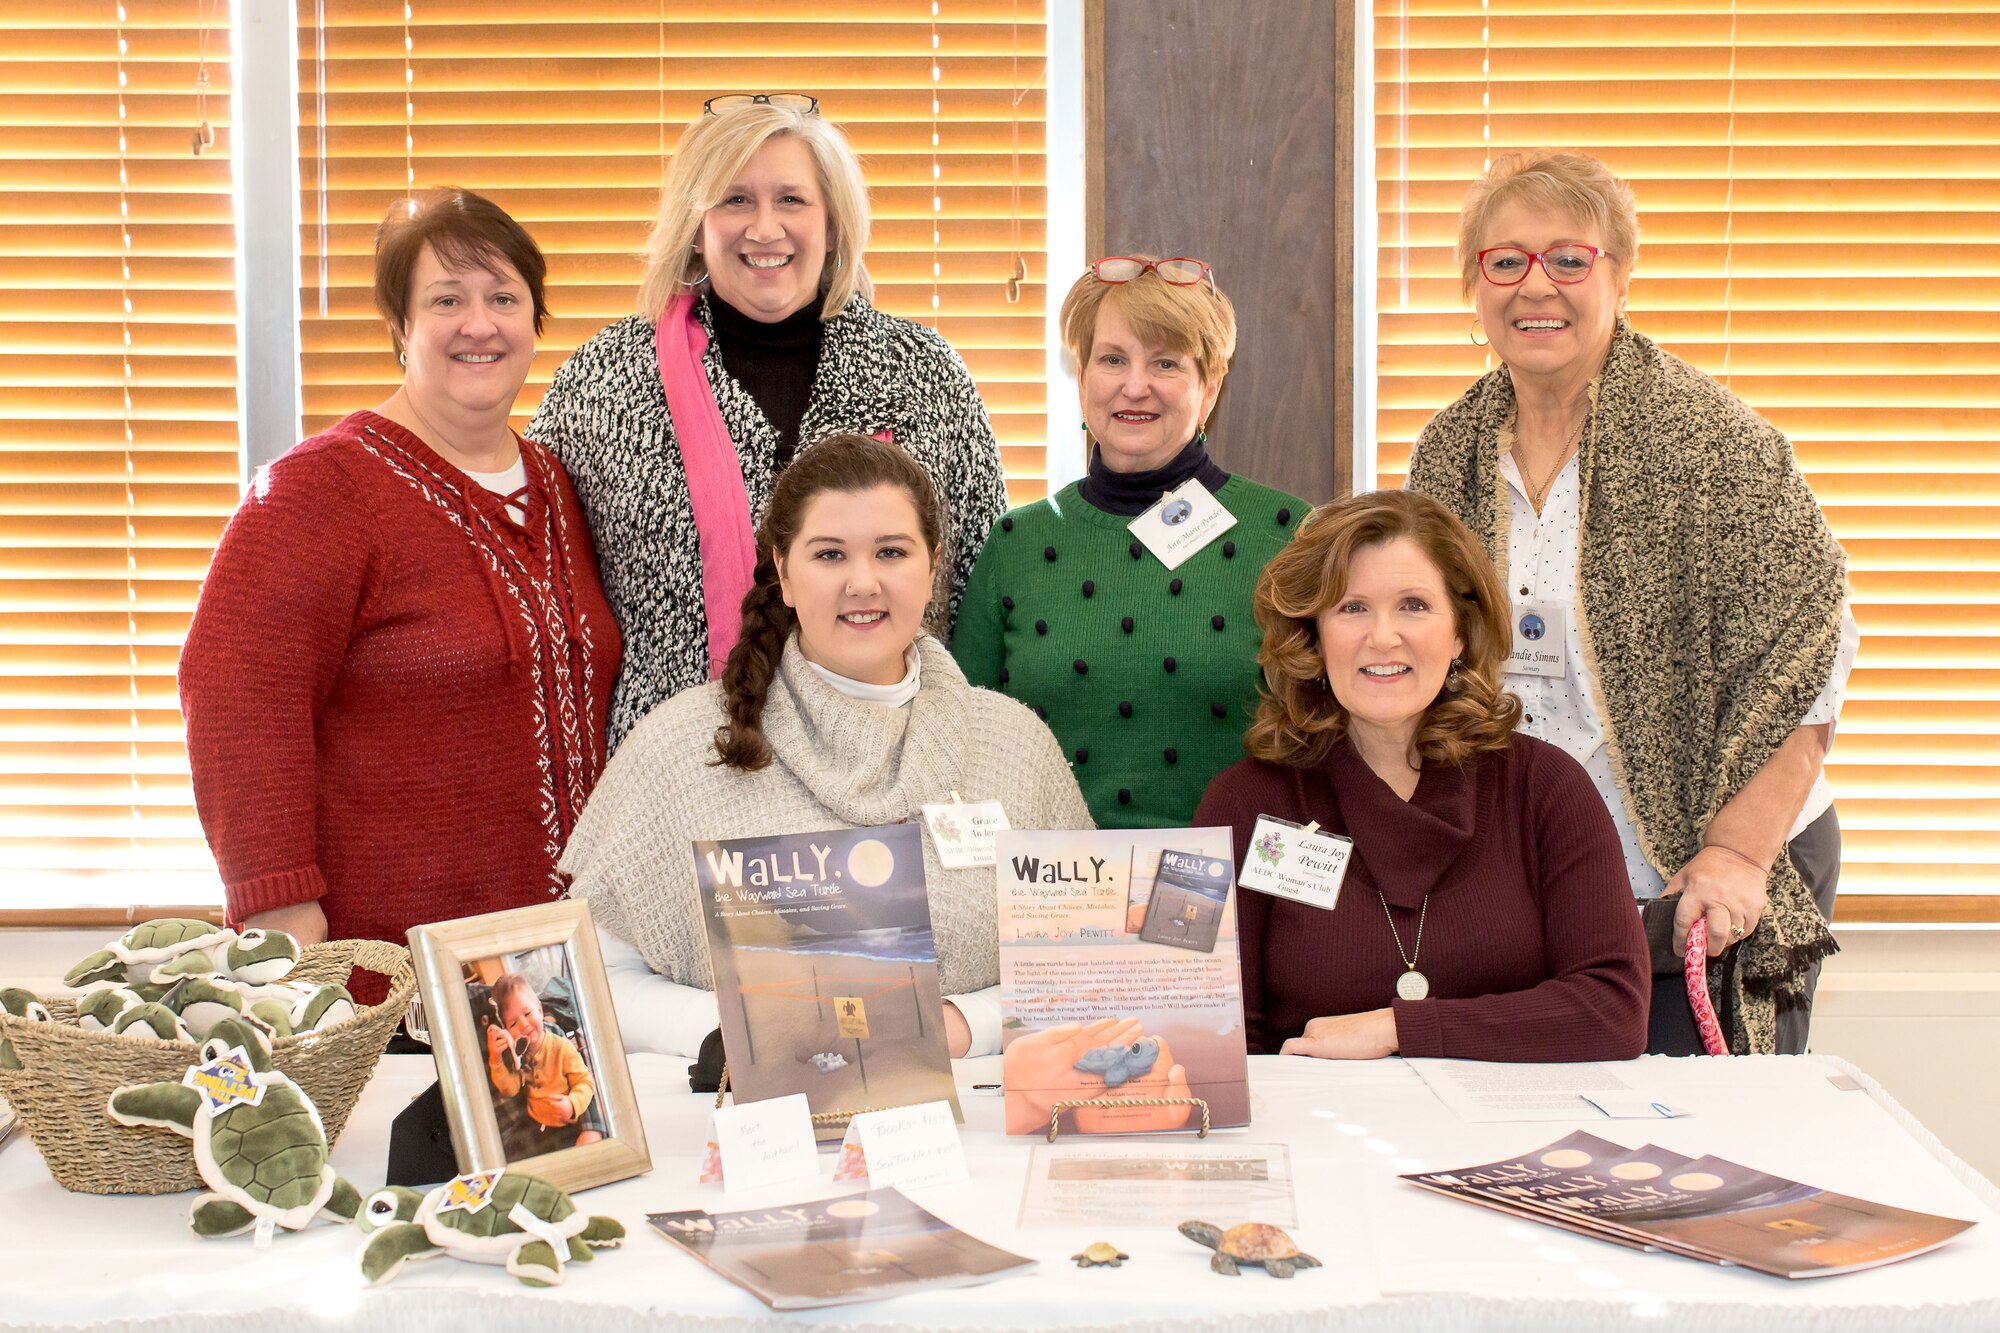 The AEDC Woman’s Club members look at products displayed by AEDCWC meeting presenter Laura Joy Pewitt at a Jan. 4 meeting. Pewitt is the author of the children’s book “Wally, the Sea Turtle: A story about Choices, Mistakes, and Saving Grace.” She shared with AEDCWC meeting participants her journey to becoming a published author. Pictured on the back row, from left is Anne Wonder, Kate Canady, Grace Anderson, Anne-Marie Pender; front row, Pewitt, and Sandie Simms. (Courtesy photo)